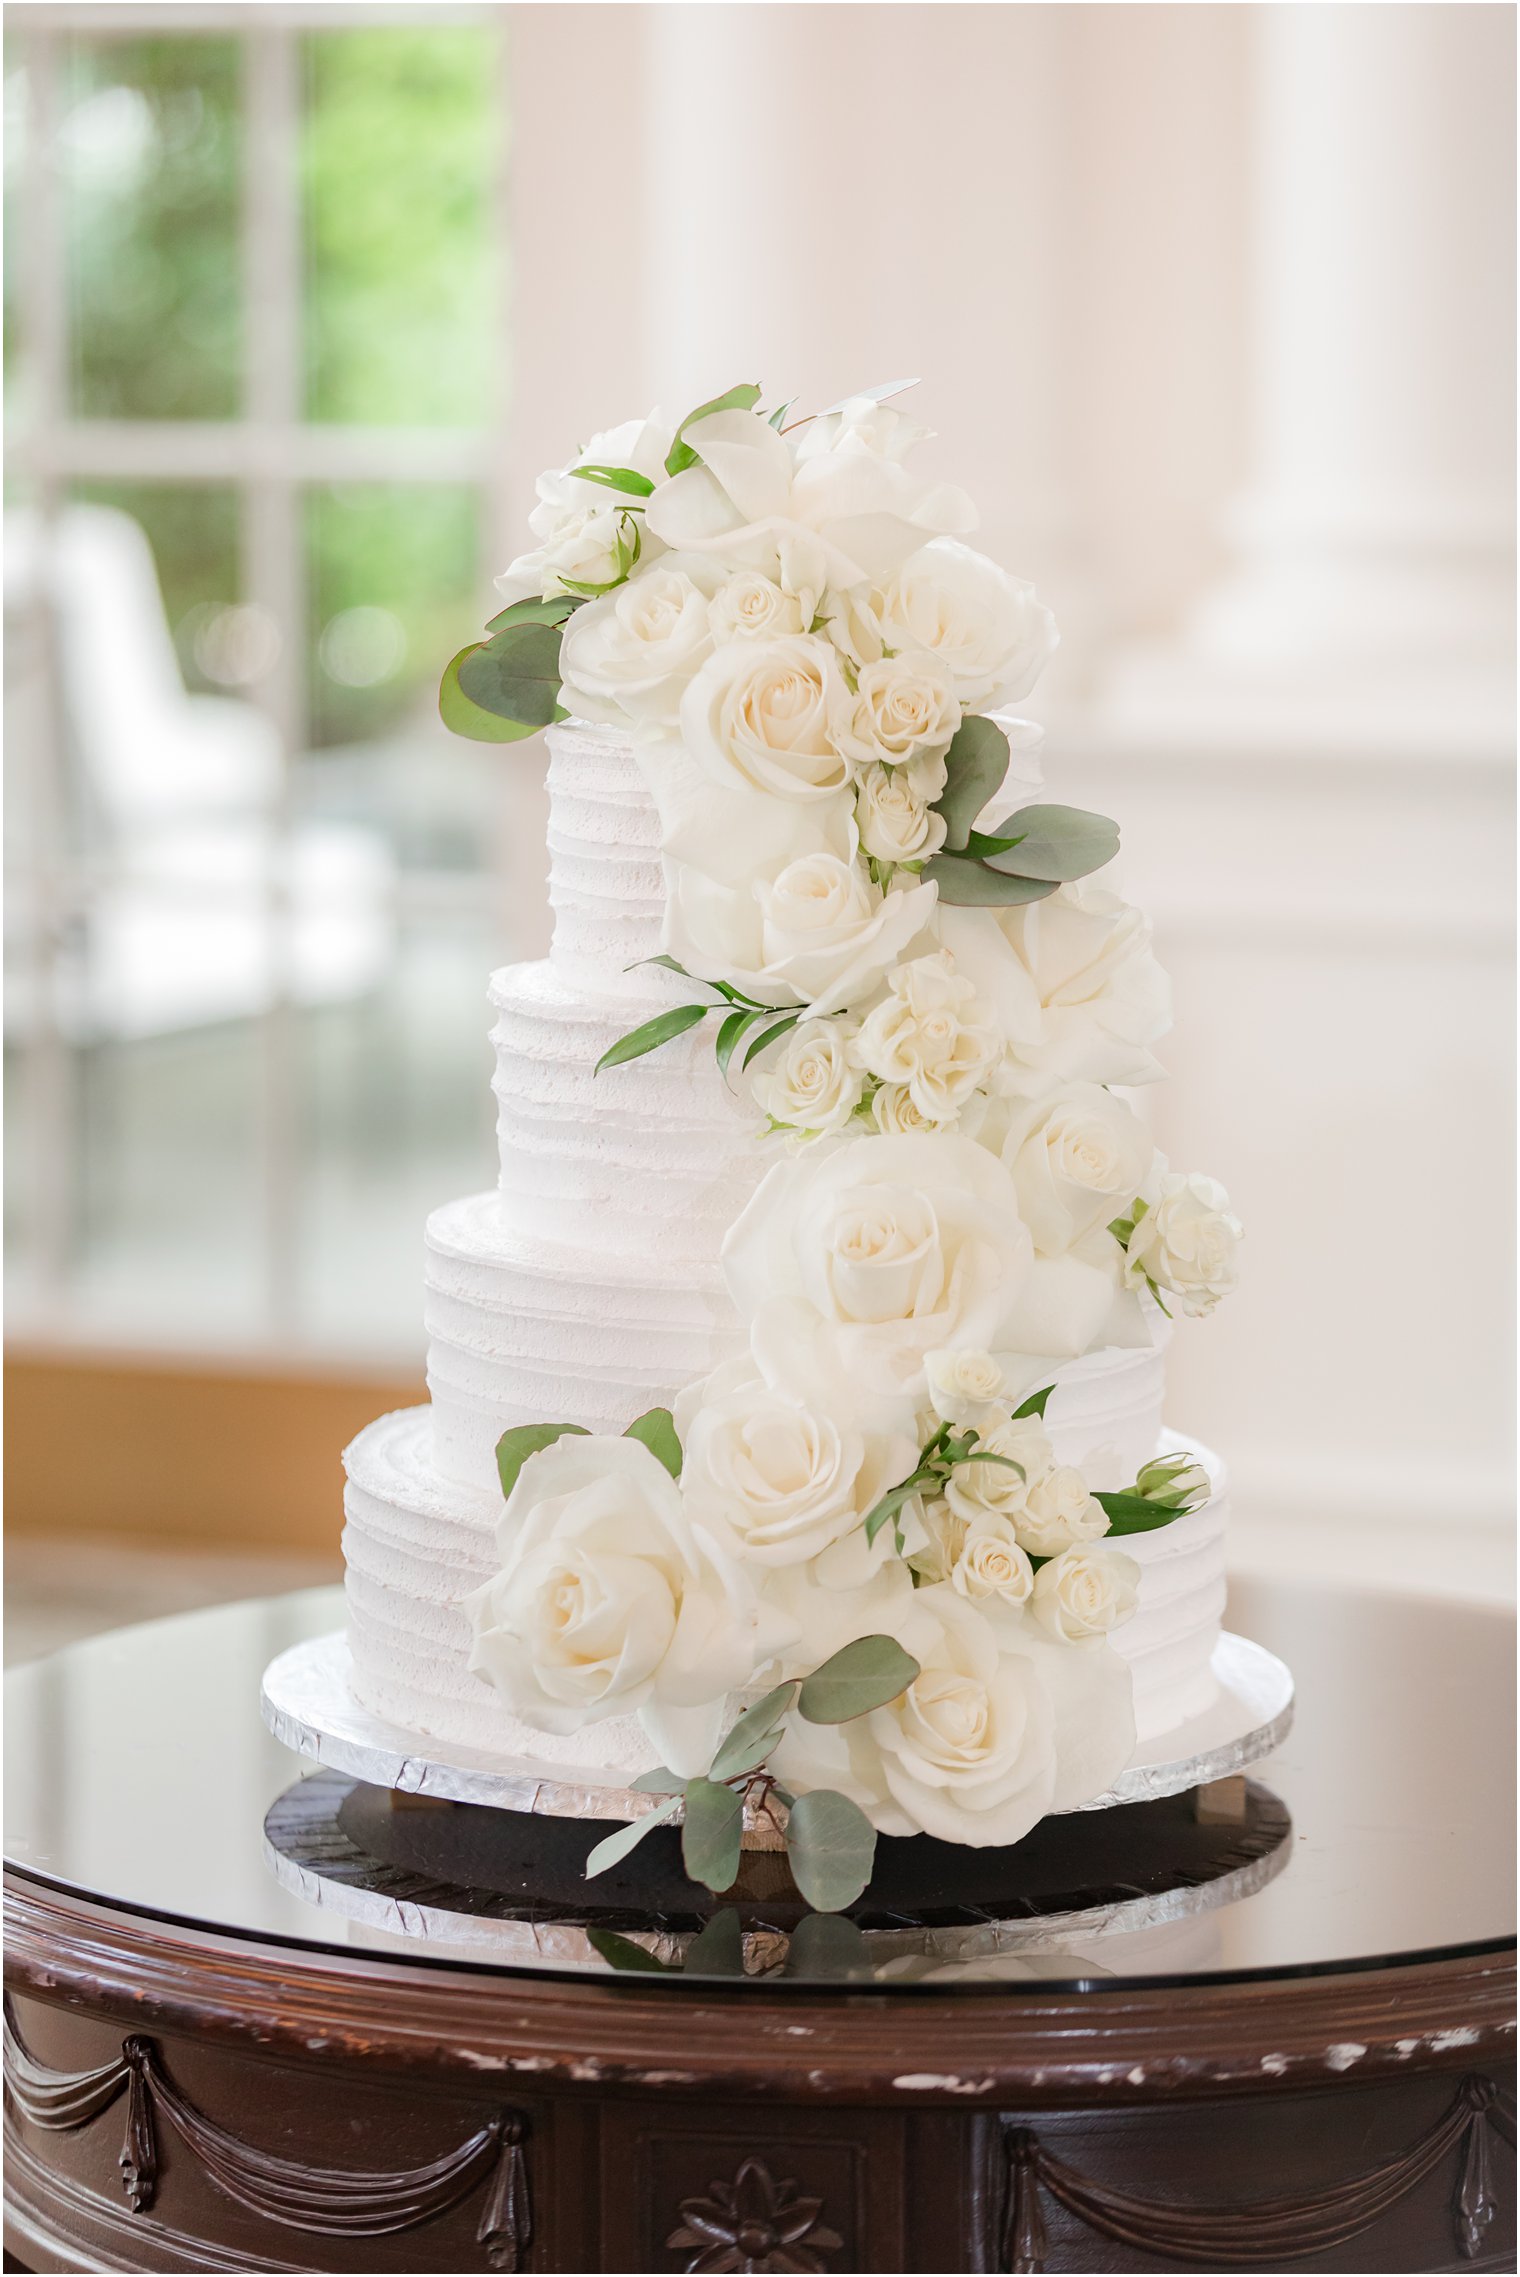 tiered wedding cake with white icing and cascading ivory flowers 